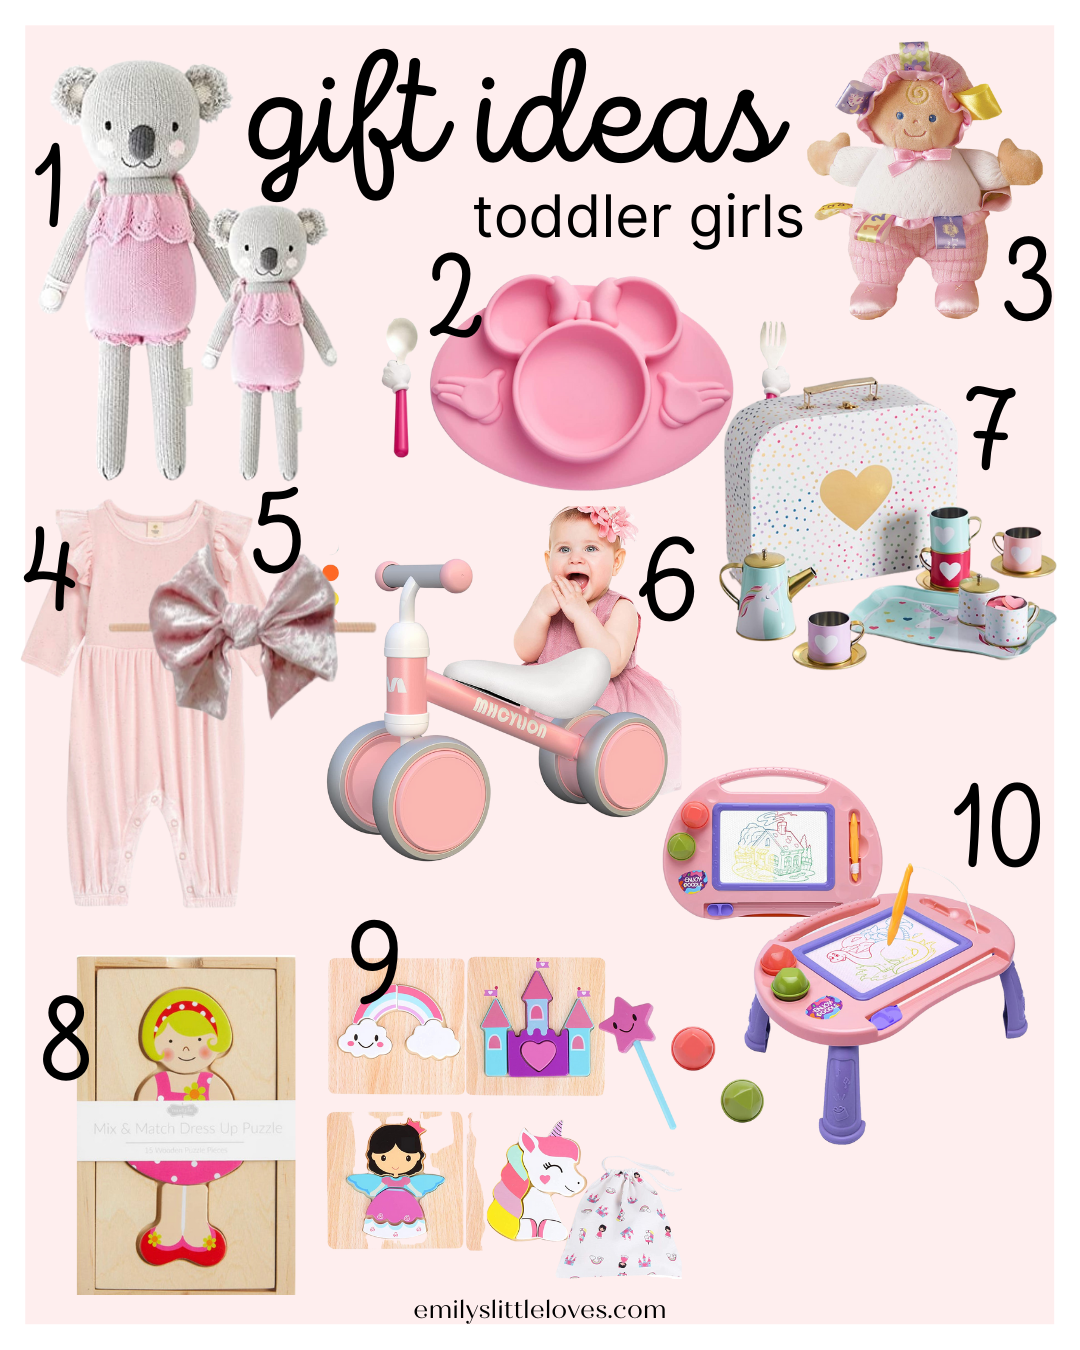 TAYLOR COLLINS ASH-Birthday Gifts For Toddler Girls